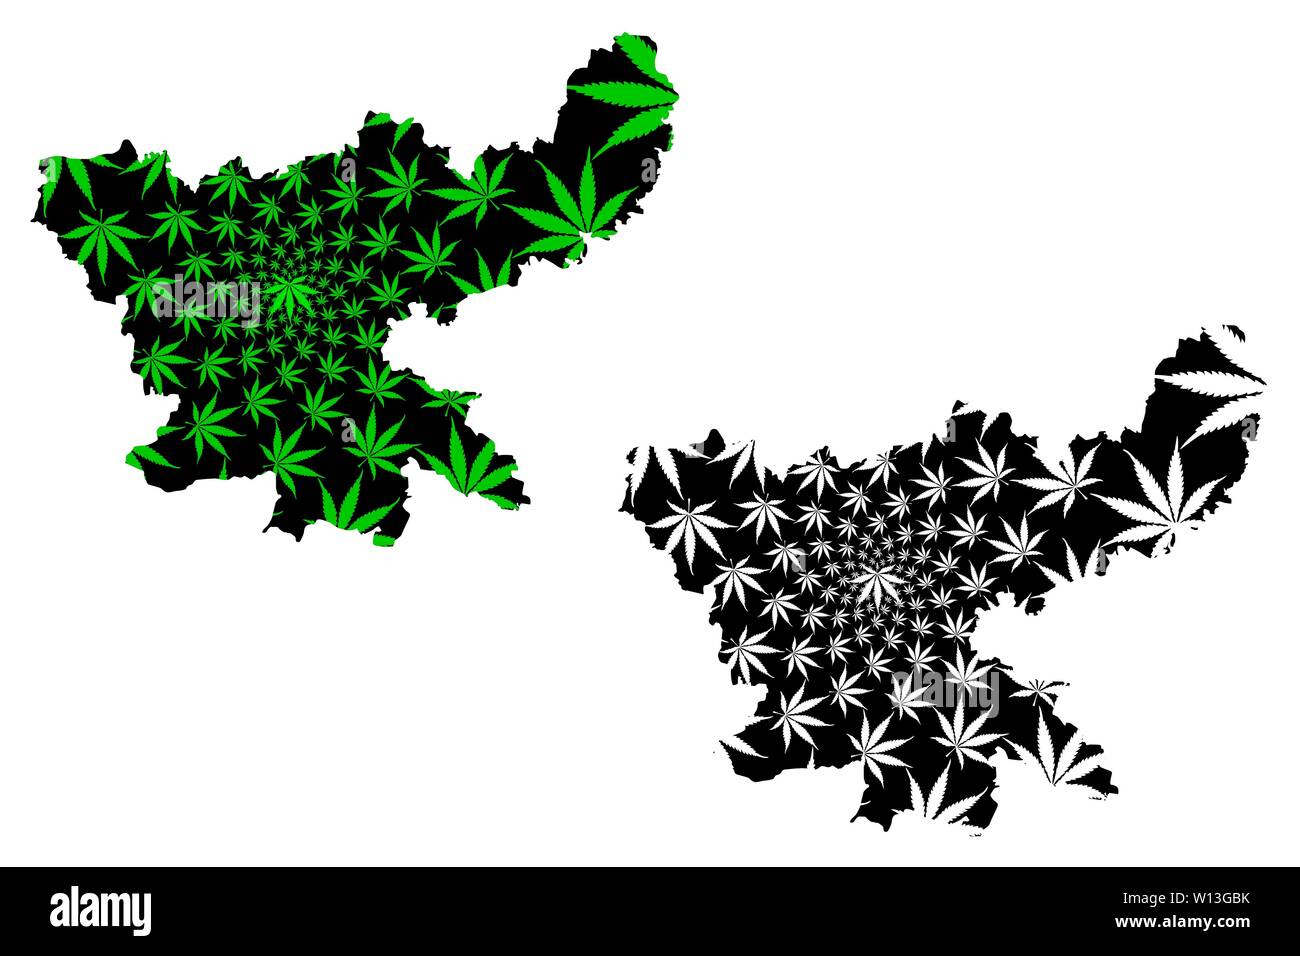 Jharkhand (States and union territories of India, Federated states, Republic of India) map is designed cannabis leaf green and black, Jharkhand state Stock Vector